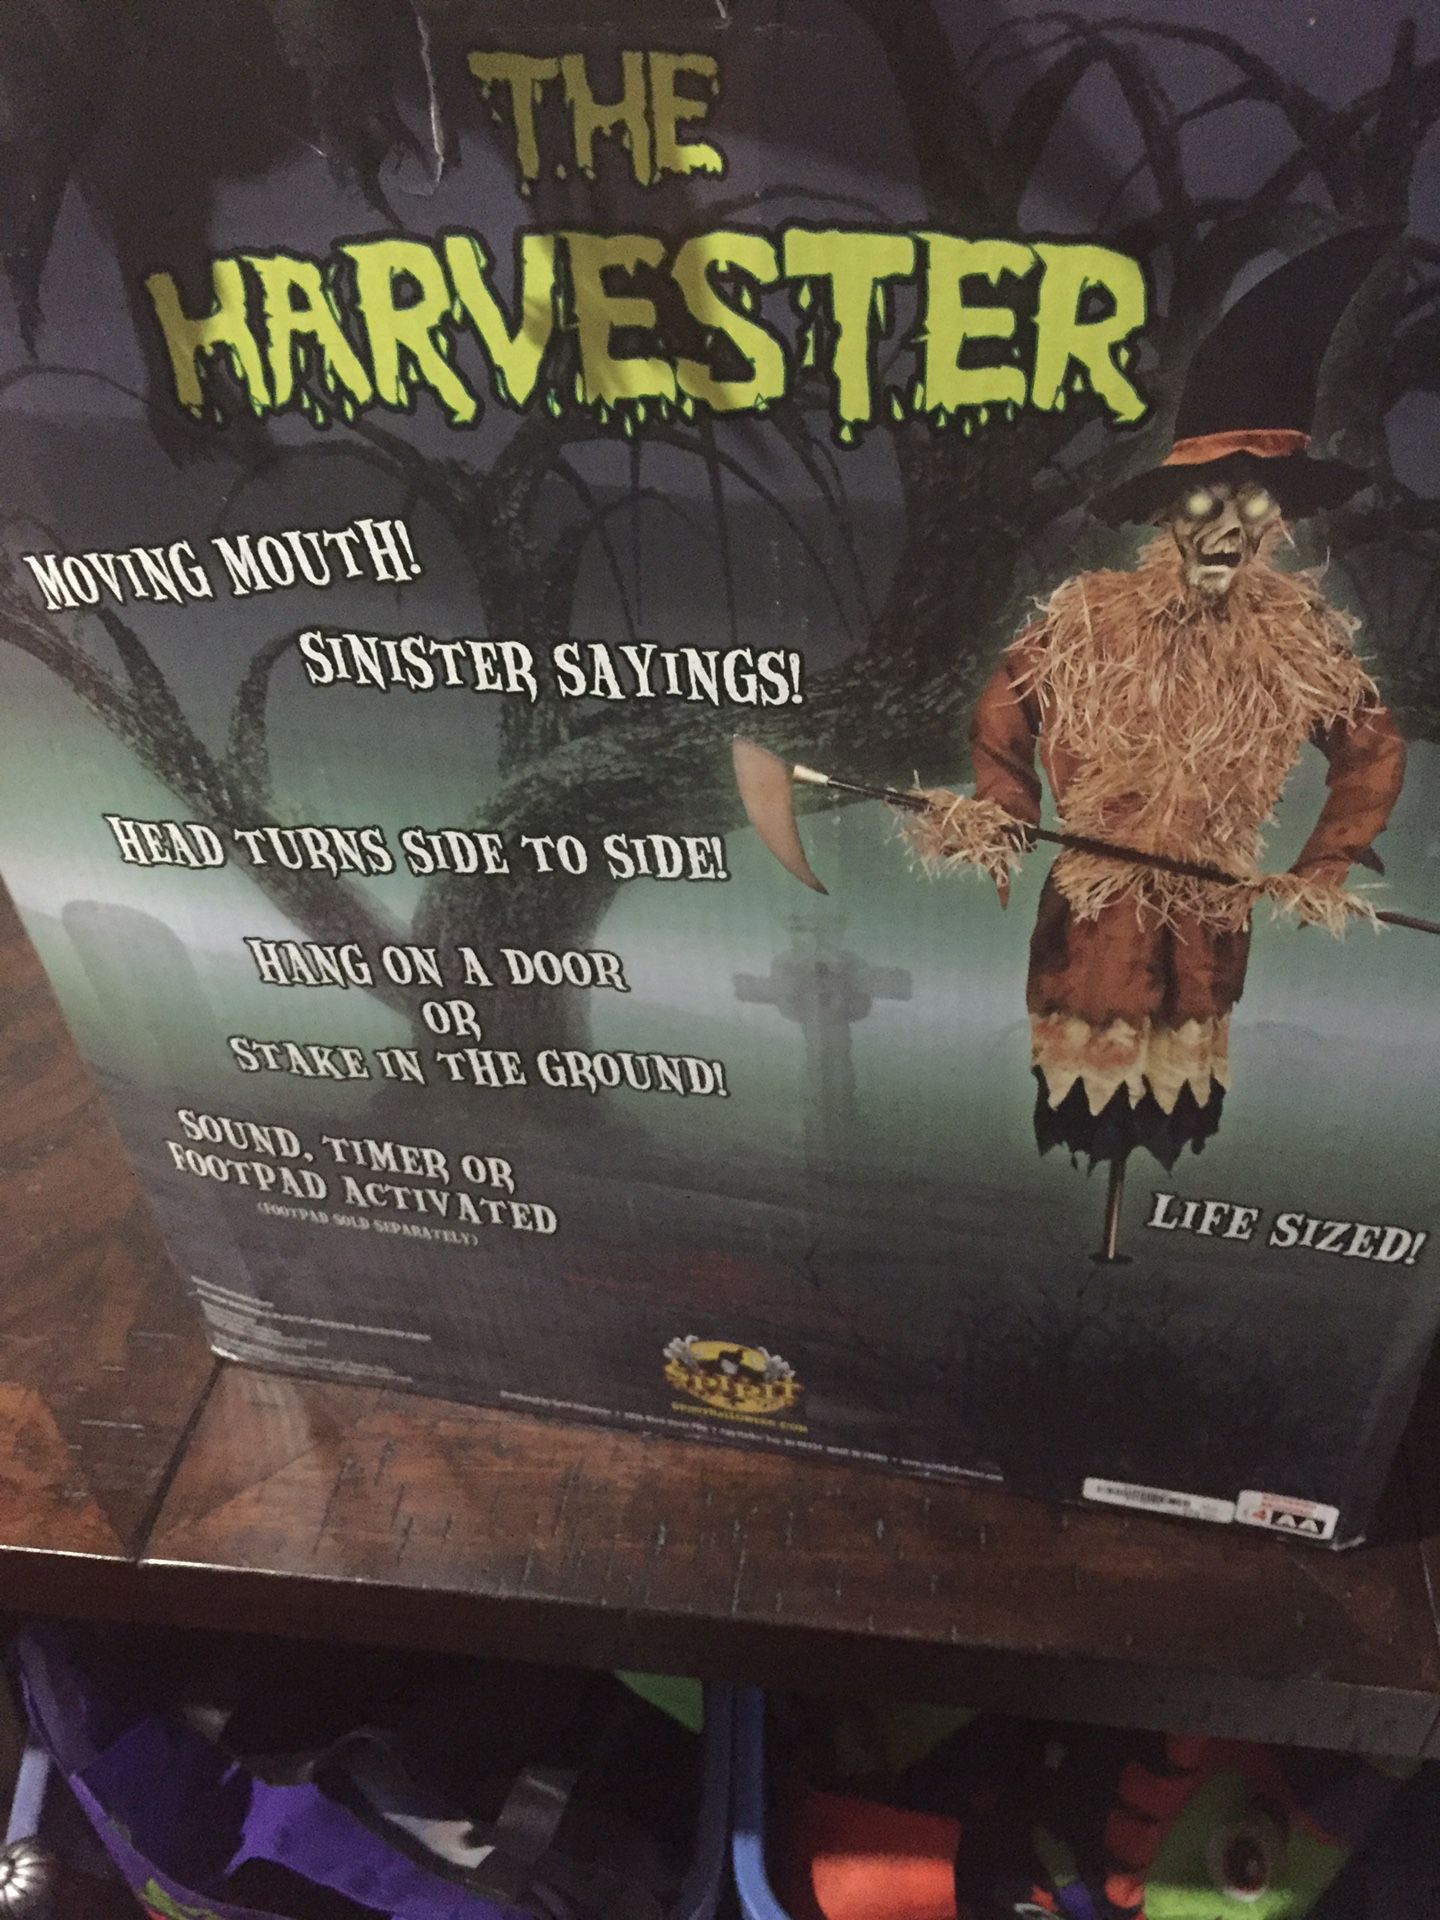 The harvester